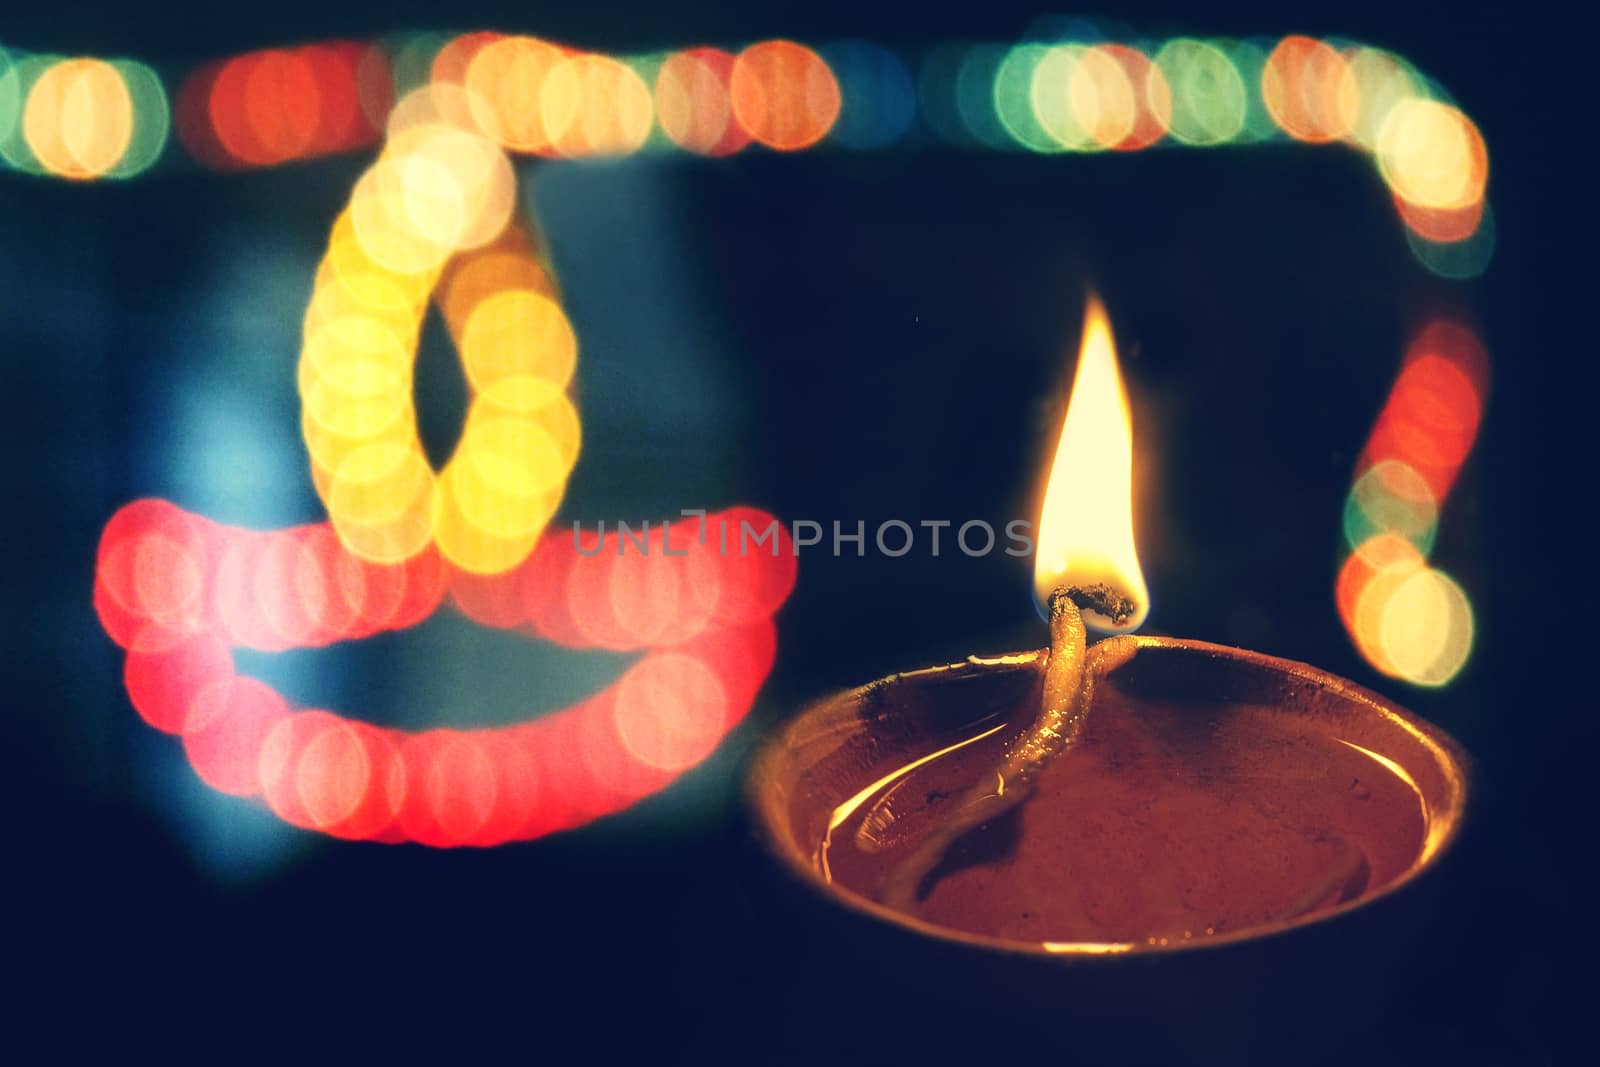 Oil Lamp in Diwali Festival, India. Diwali or Divali also known as Deepavali and the "festival of lights", is an ancient Hindu festival celebrated in autumn every year. The festival spiritually signifies the victory of light over darkness, knowledge over ignorance, good over evil, and hope over despair.